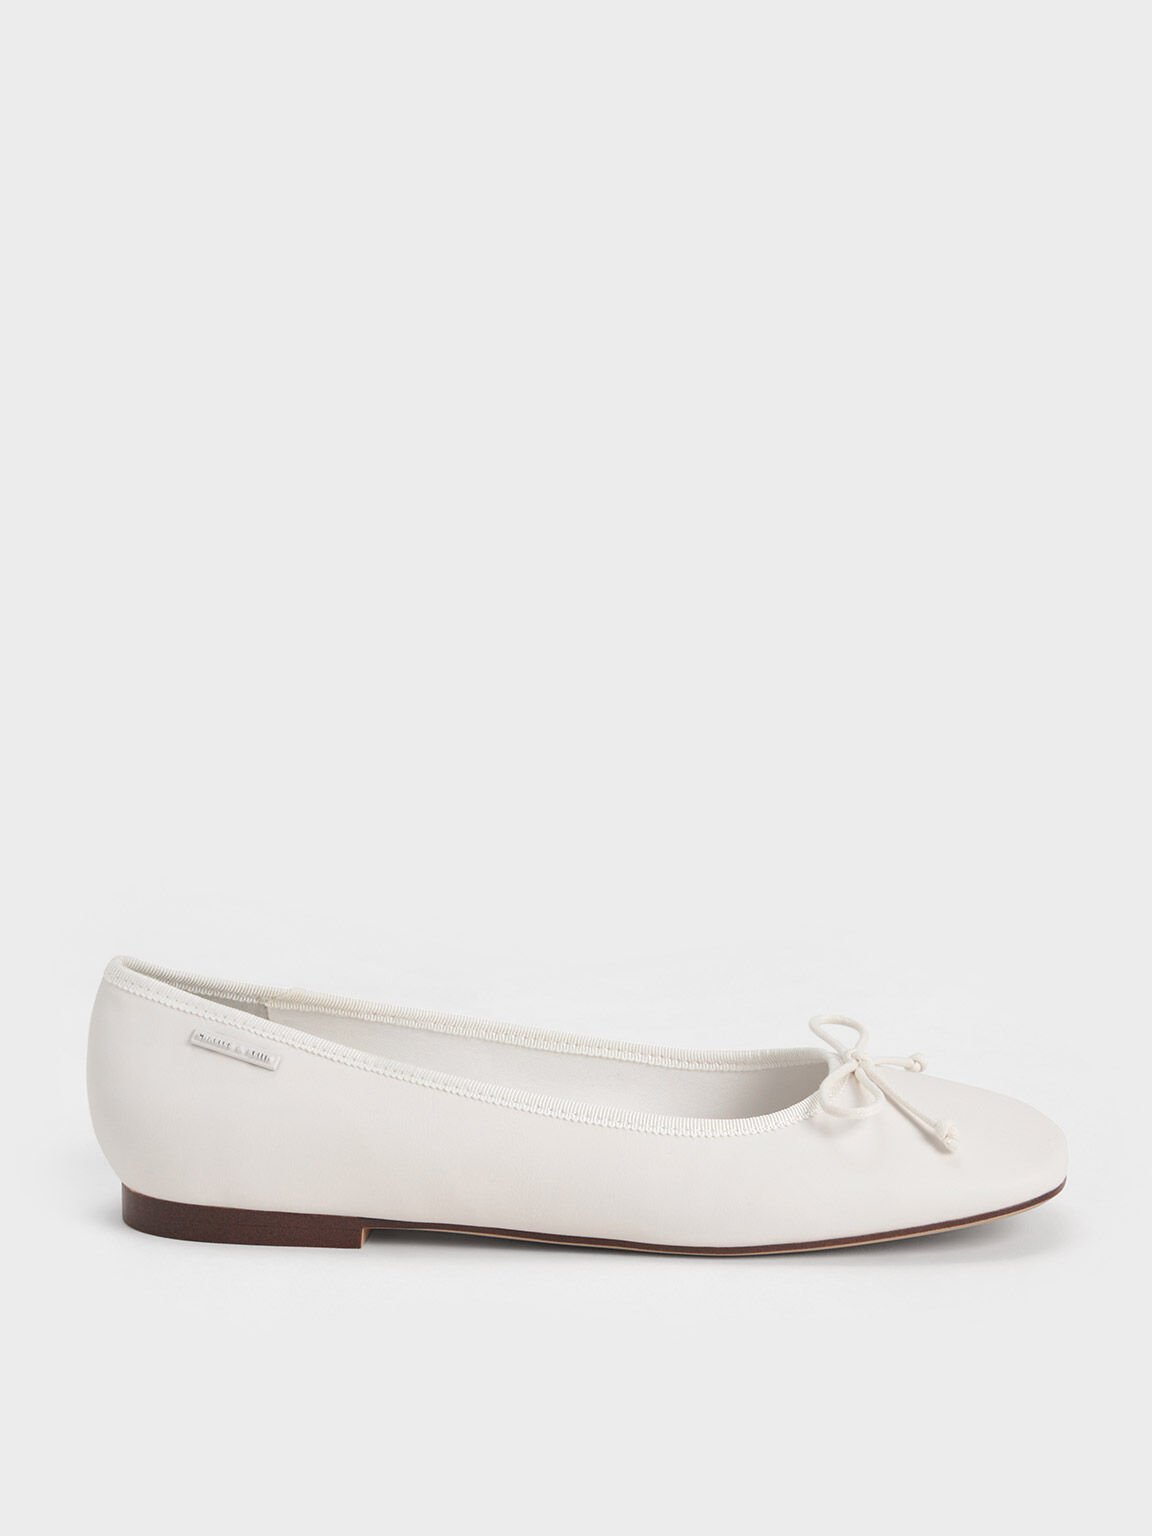 Rounded Square-Toe Bow Ballerinas, White, hi-res